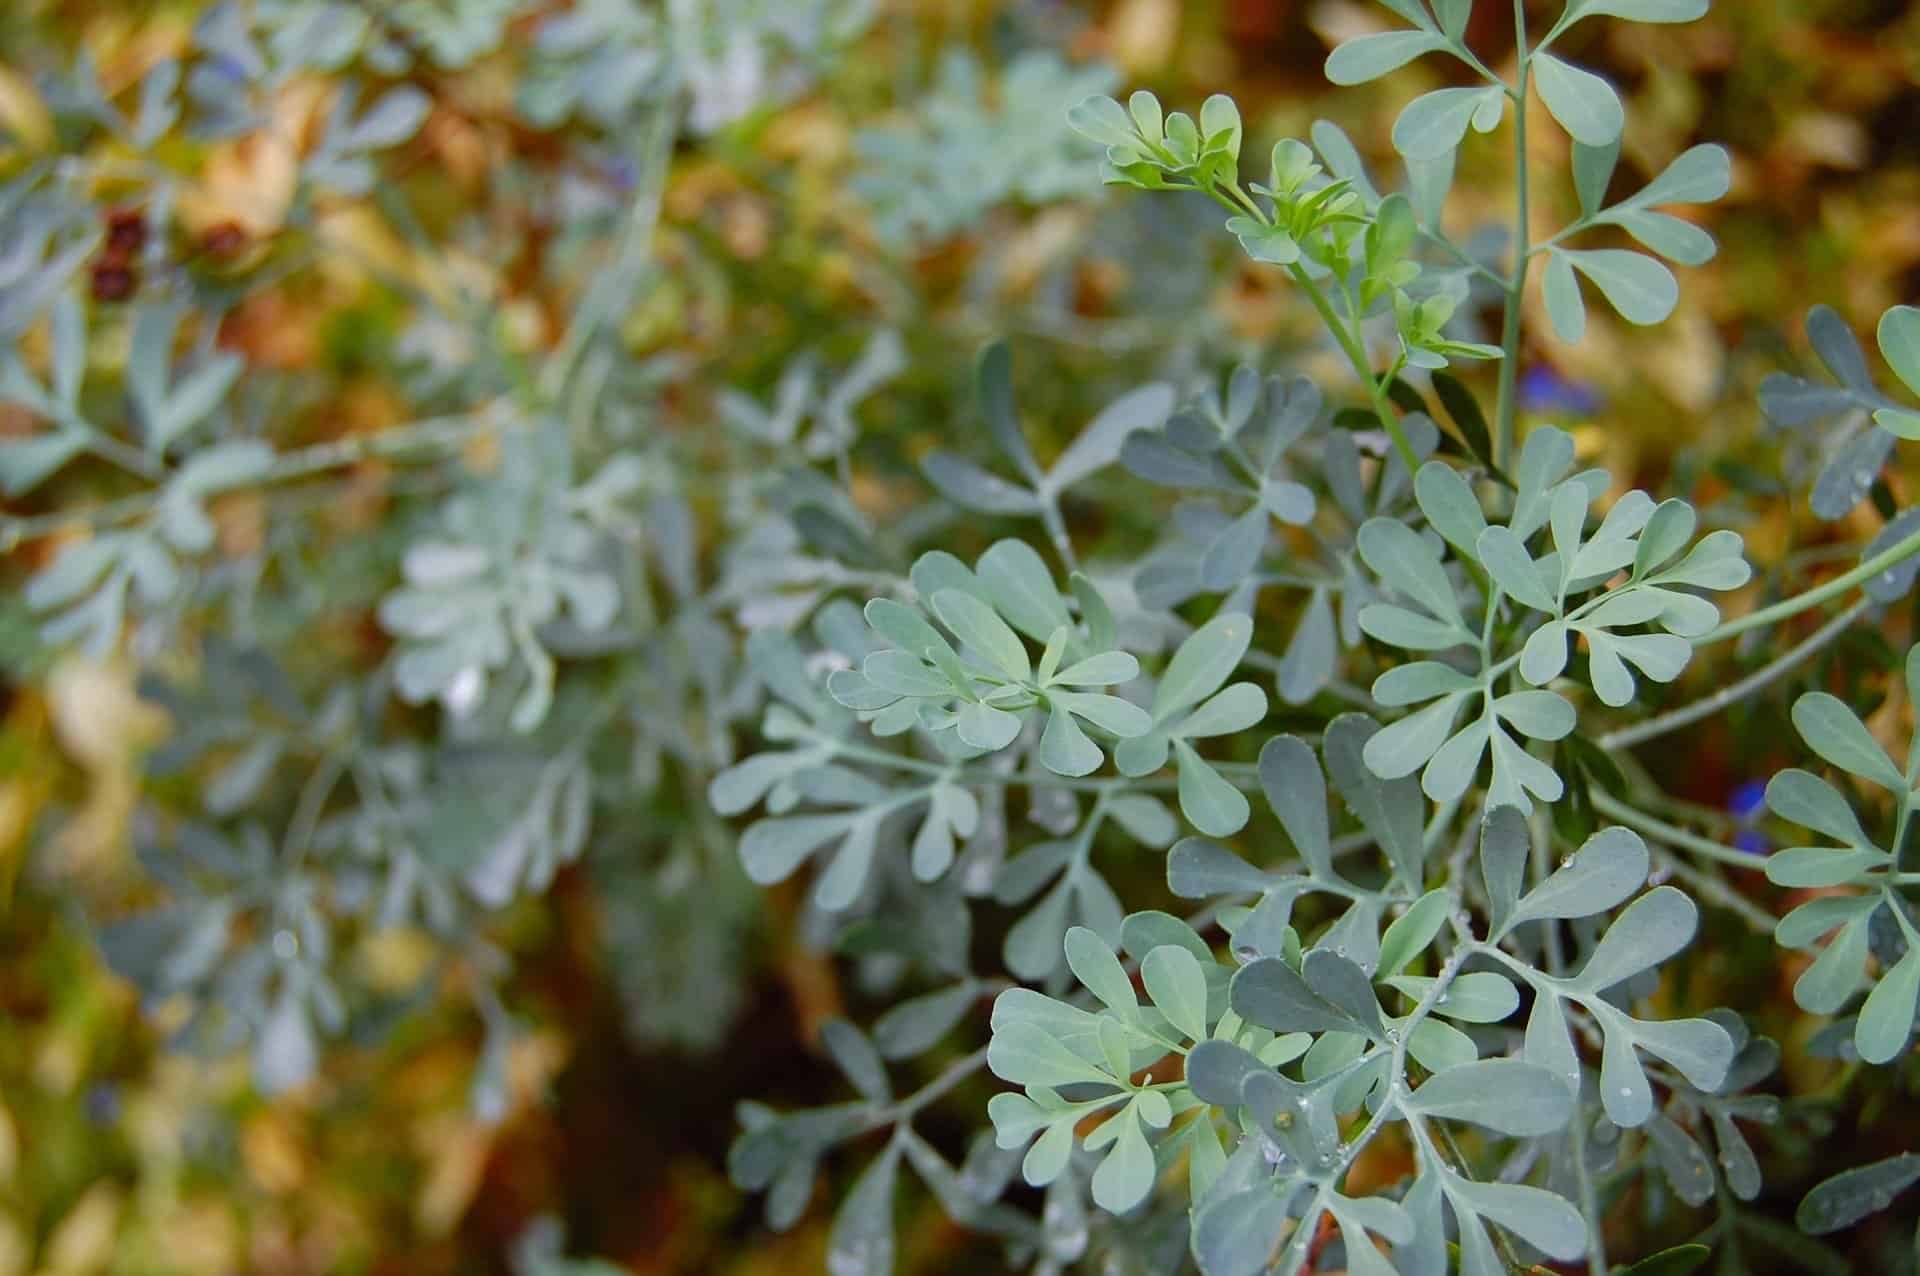 Rue Plant How To Grow And Care